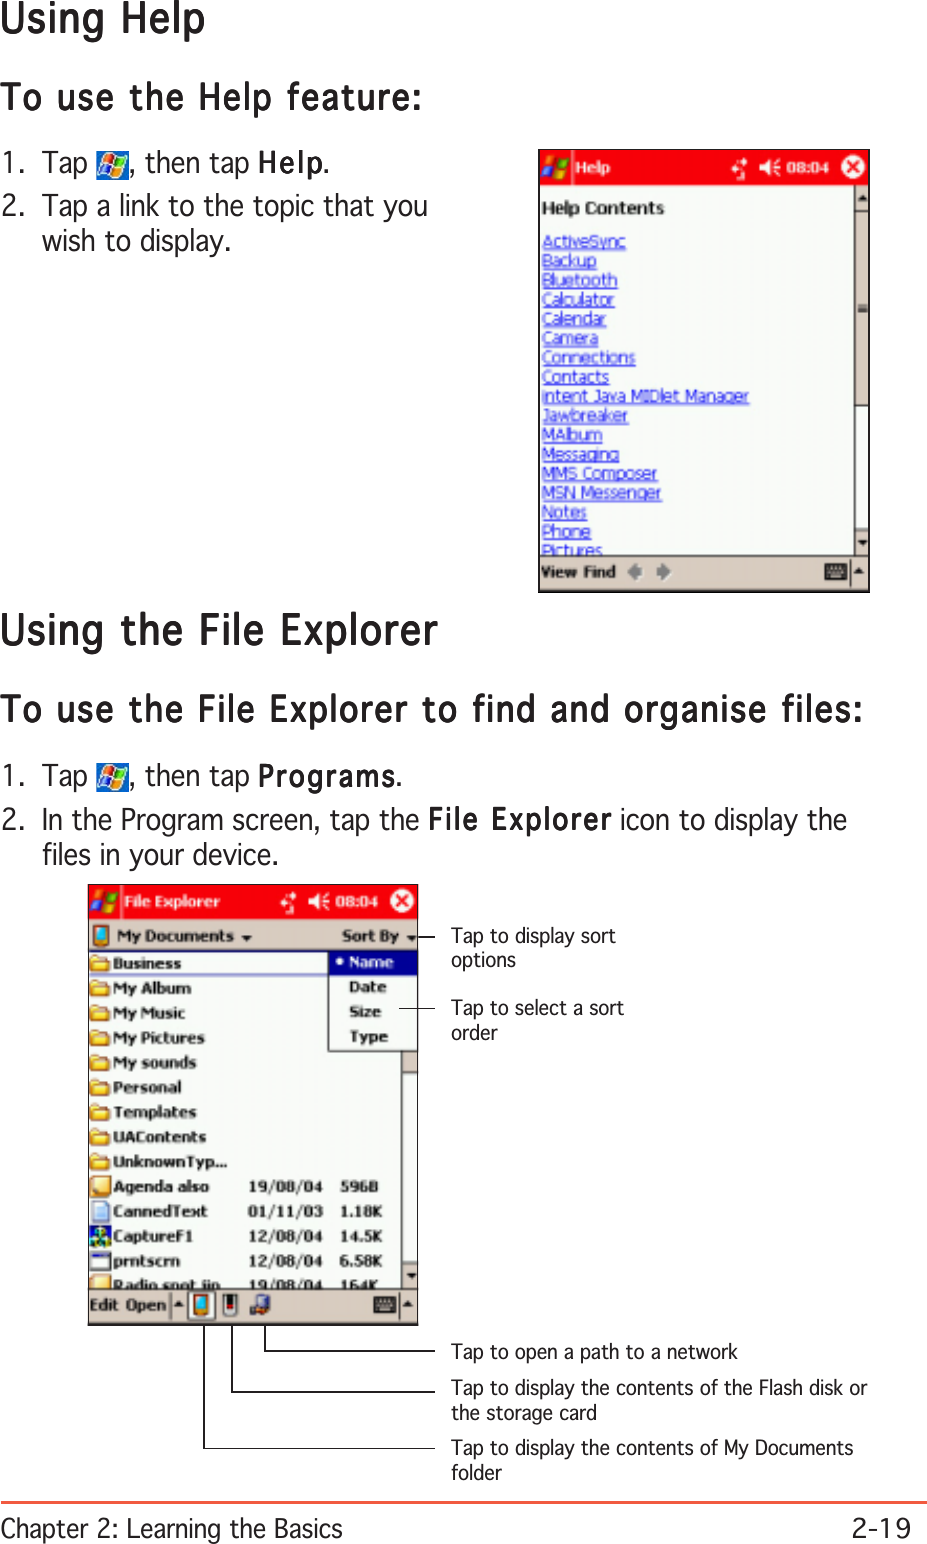 Chapter 2: Learning the Basics2-19Using the File ExplorerUsing the File ExplorerUsing the File ExplorerUsing the File ExplorerUsing the File ExplorerTo use the File Explorer to find and organise files:To use the File Explorer to find and organise files:To use the File Explorer to find and organise files:To use the File Explorer to find and organise files:To use the File Explorer to find and organise files:1. Tap  , then tap ProgramsProgramsProgramsProgramsPrograms.2. In the Program screen, tap the File ExplorerFile ExplorerFile ExplorerFile ExplorerFile Explorer icon to display thefiles in your device.Using HelpUsing HelpUsing HelpUsing HelpUsing HelpTo use the Help feature:To use the Help feature:To use the Help feature:To use the Help feature:To use the Help feature:1. Tap  , then tap HelpHelpHelpHelpHelp.2. Tap a link to the topic that youwish to display.Tap to select a sortorderTap to display sortoptionsTap to display the contents of My DocumentsfolderTap to display the contents of the Flash disk orthe storage cardTap to open a path to a network